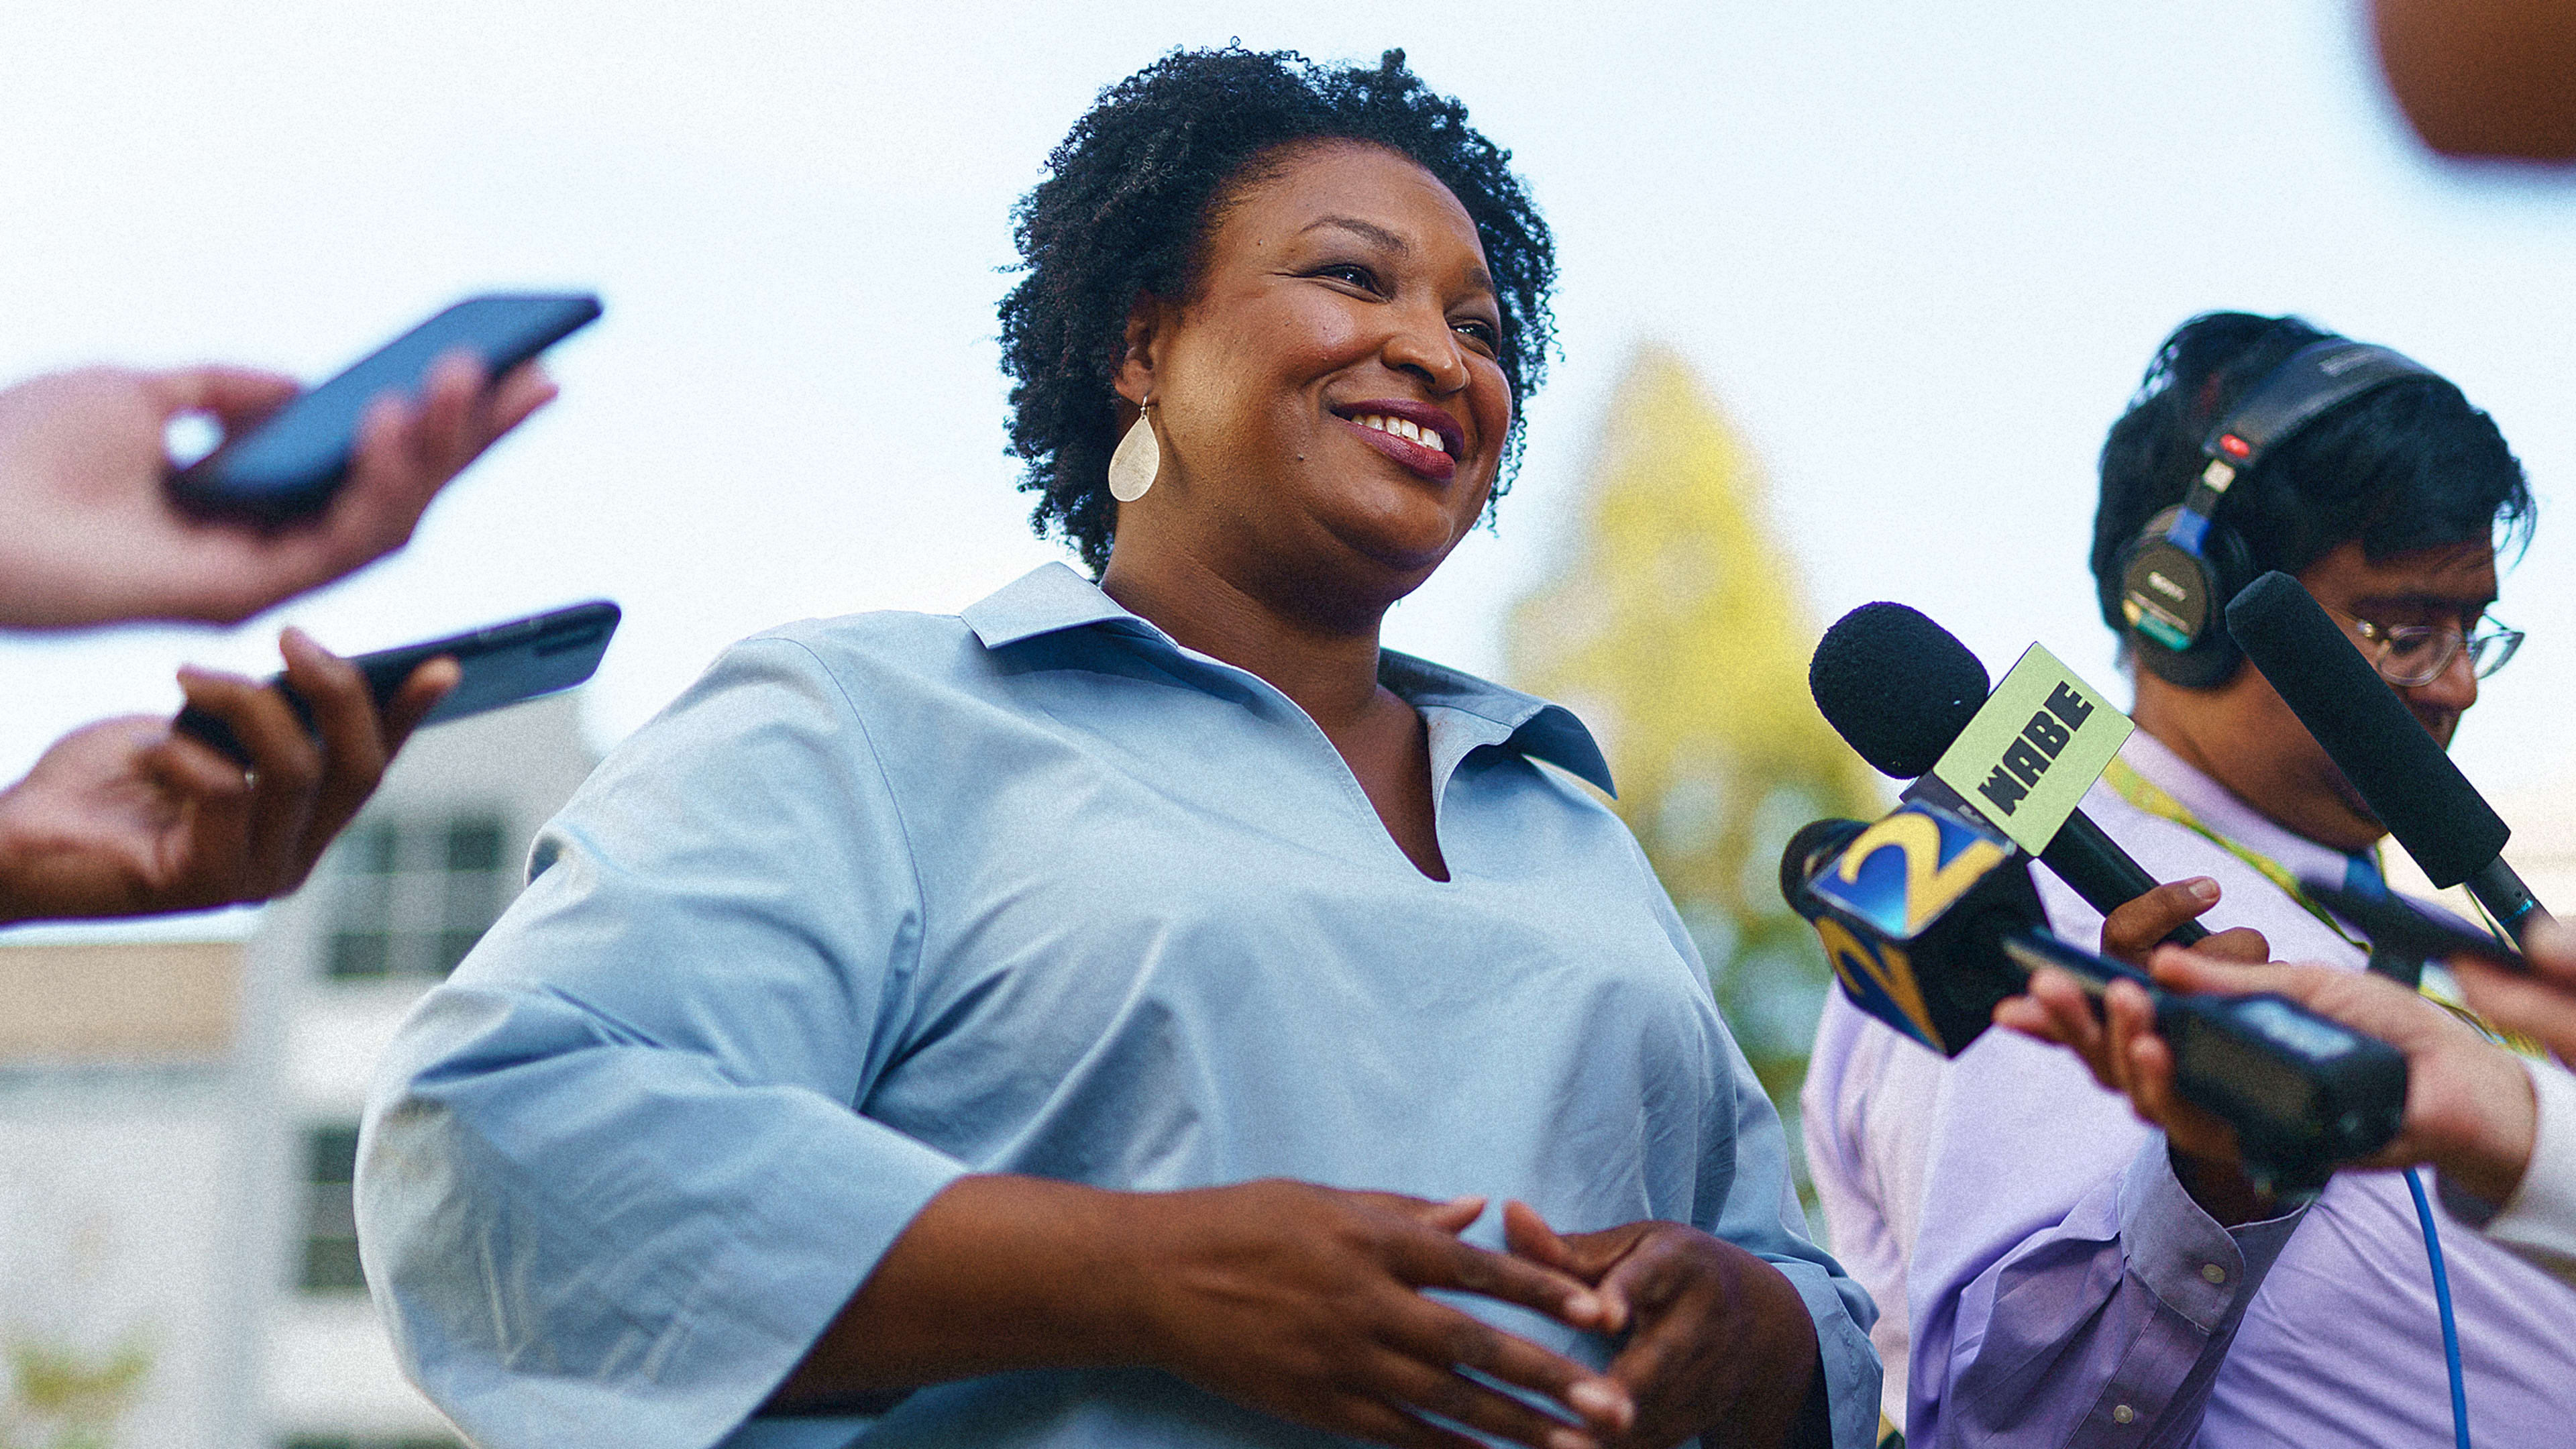 Why Stacey Abrams is working on electric stoves